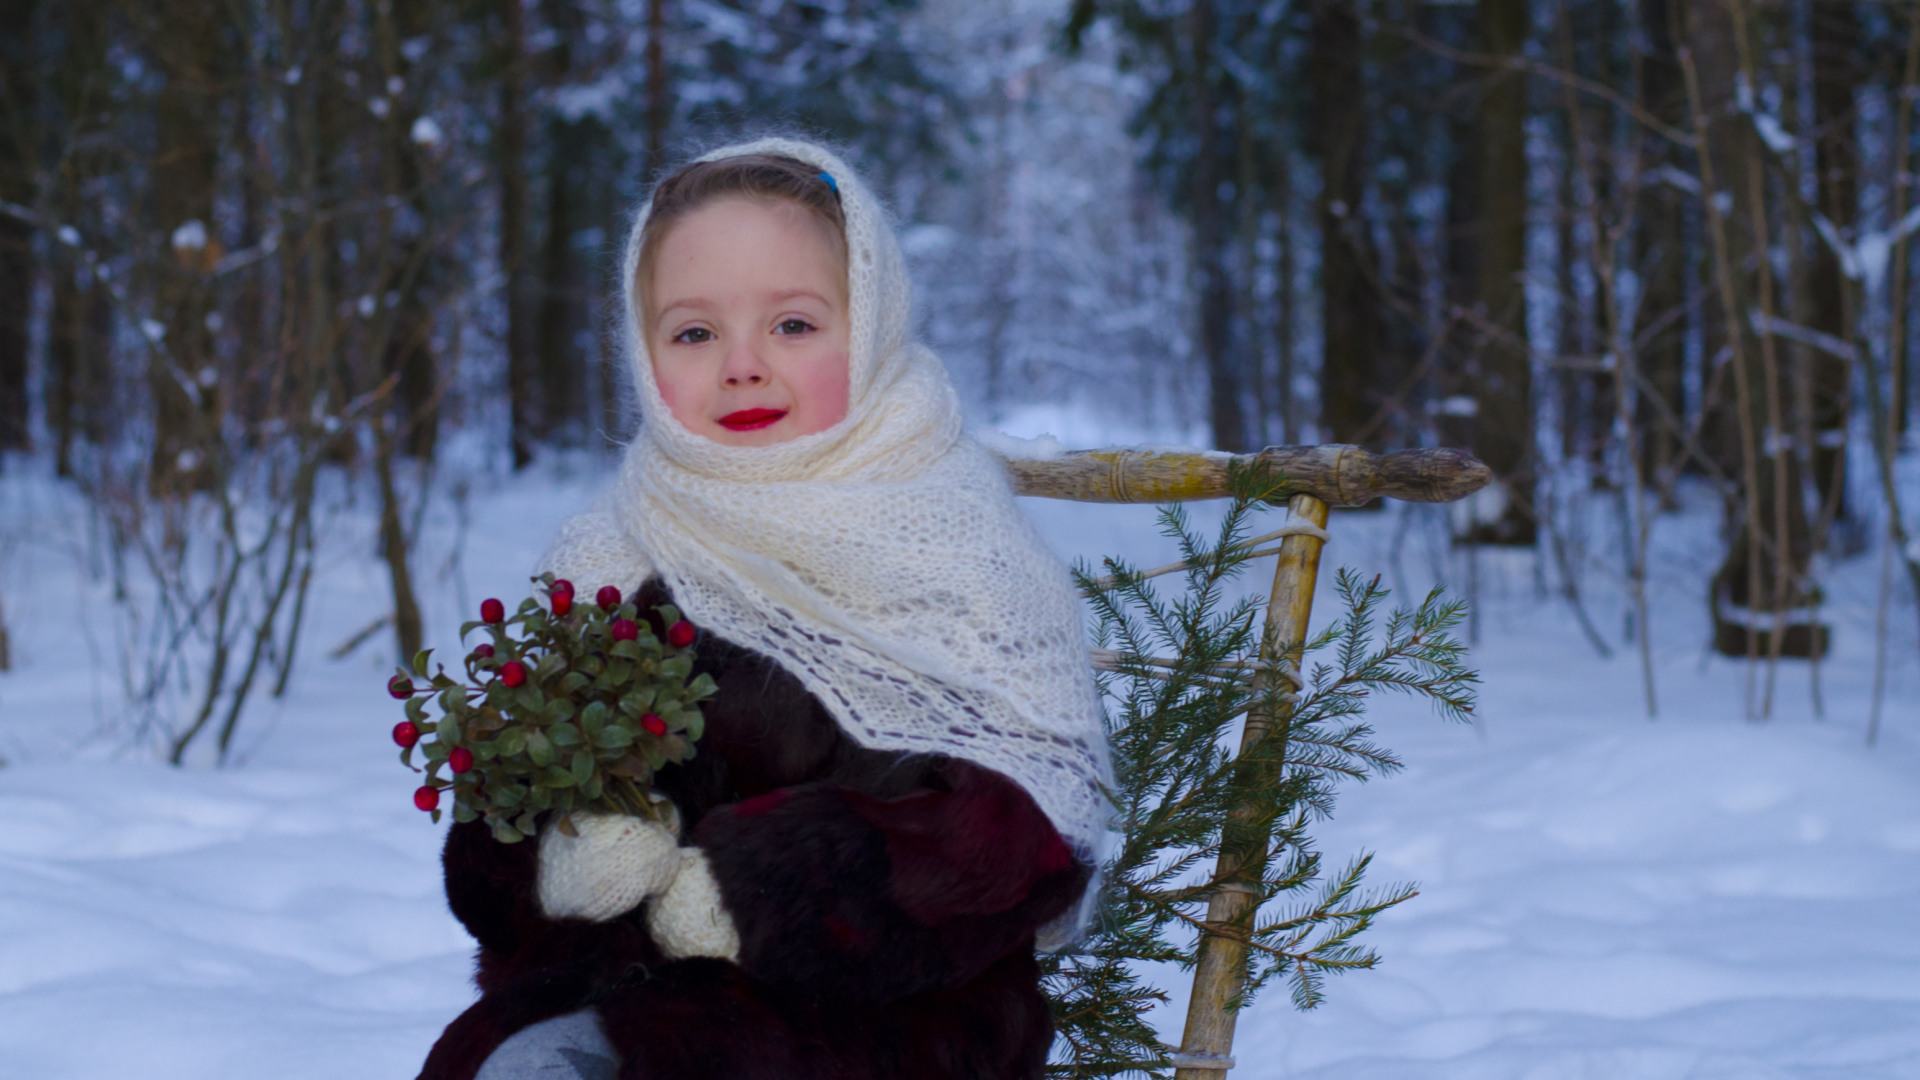 Little Girl In Winter Outfit wallpaper 1920x1080